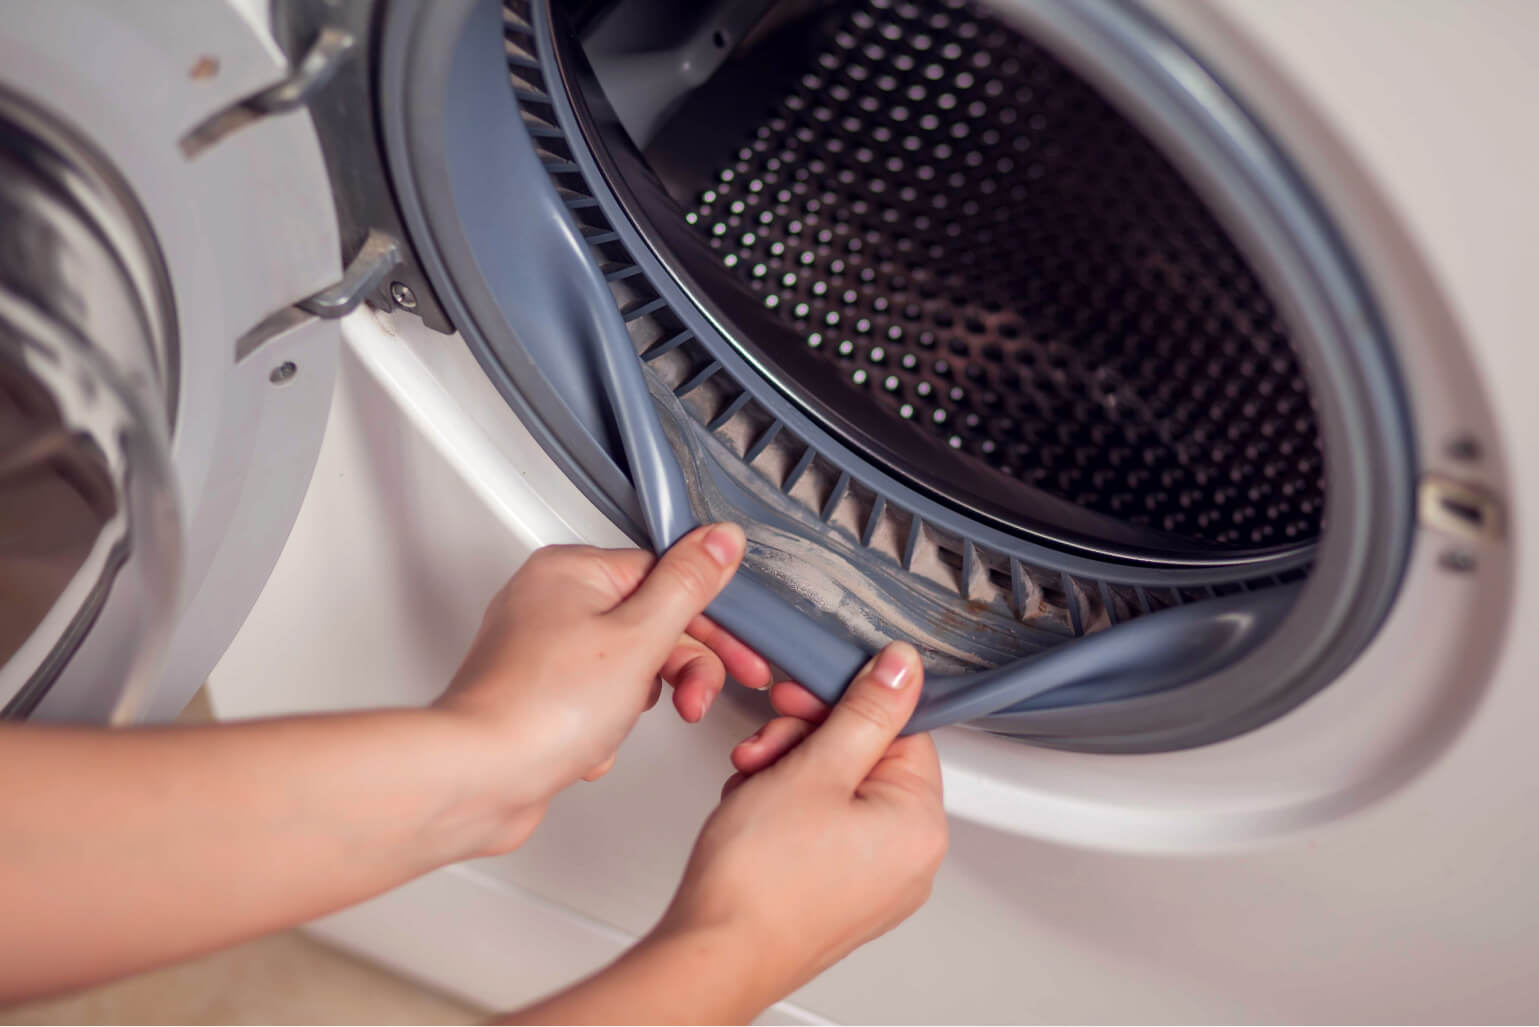 Washer Smells Bad? How to Clean a Washer